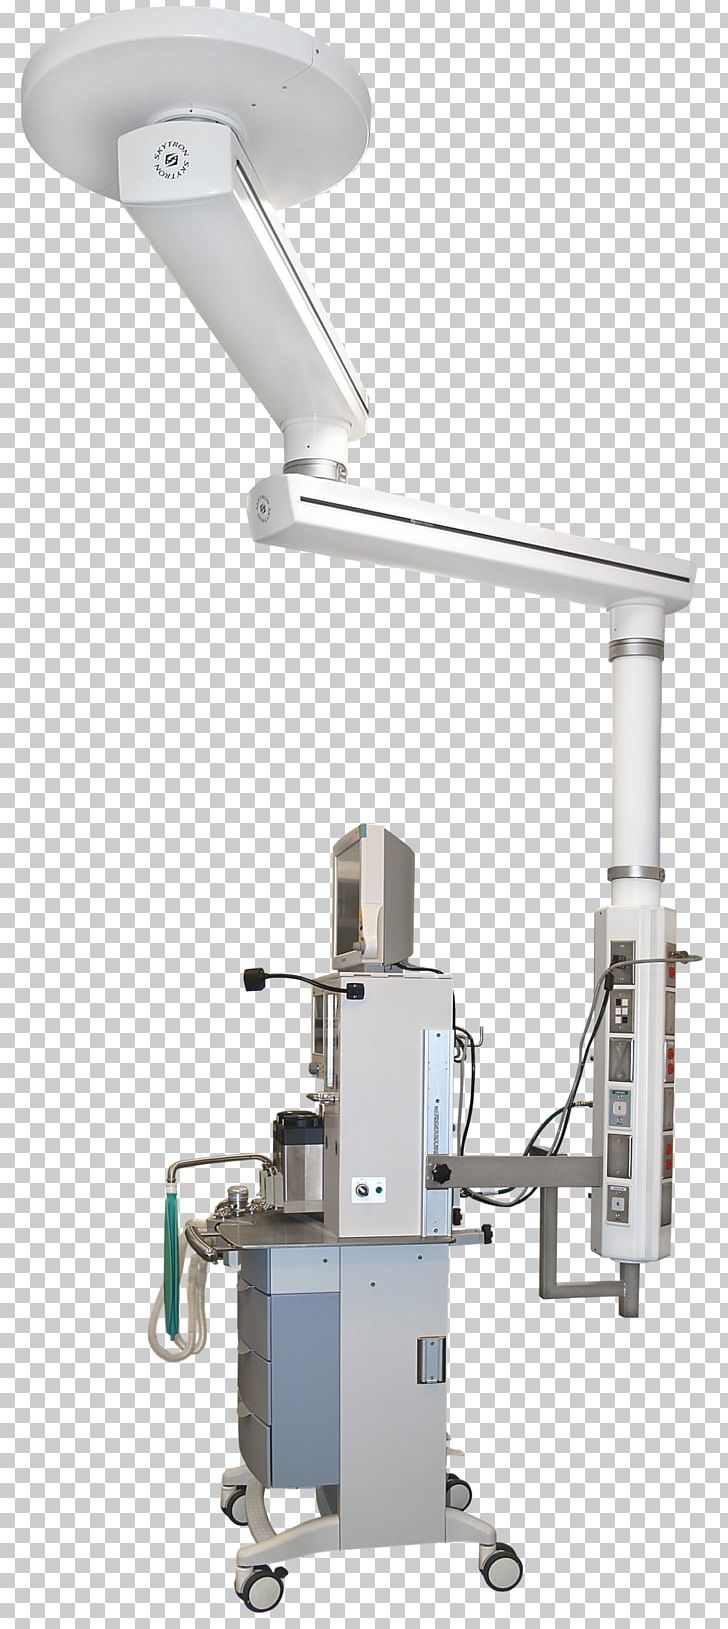 Anesthesia Anaesthetic Machine Medical Equipment Intensive Care Unit Cath Lab PNG, Clipart, Anaesthetic Machine, Anesthesia, Angle, Cath Lab, Hospital Free PNG Download